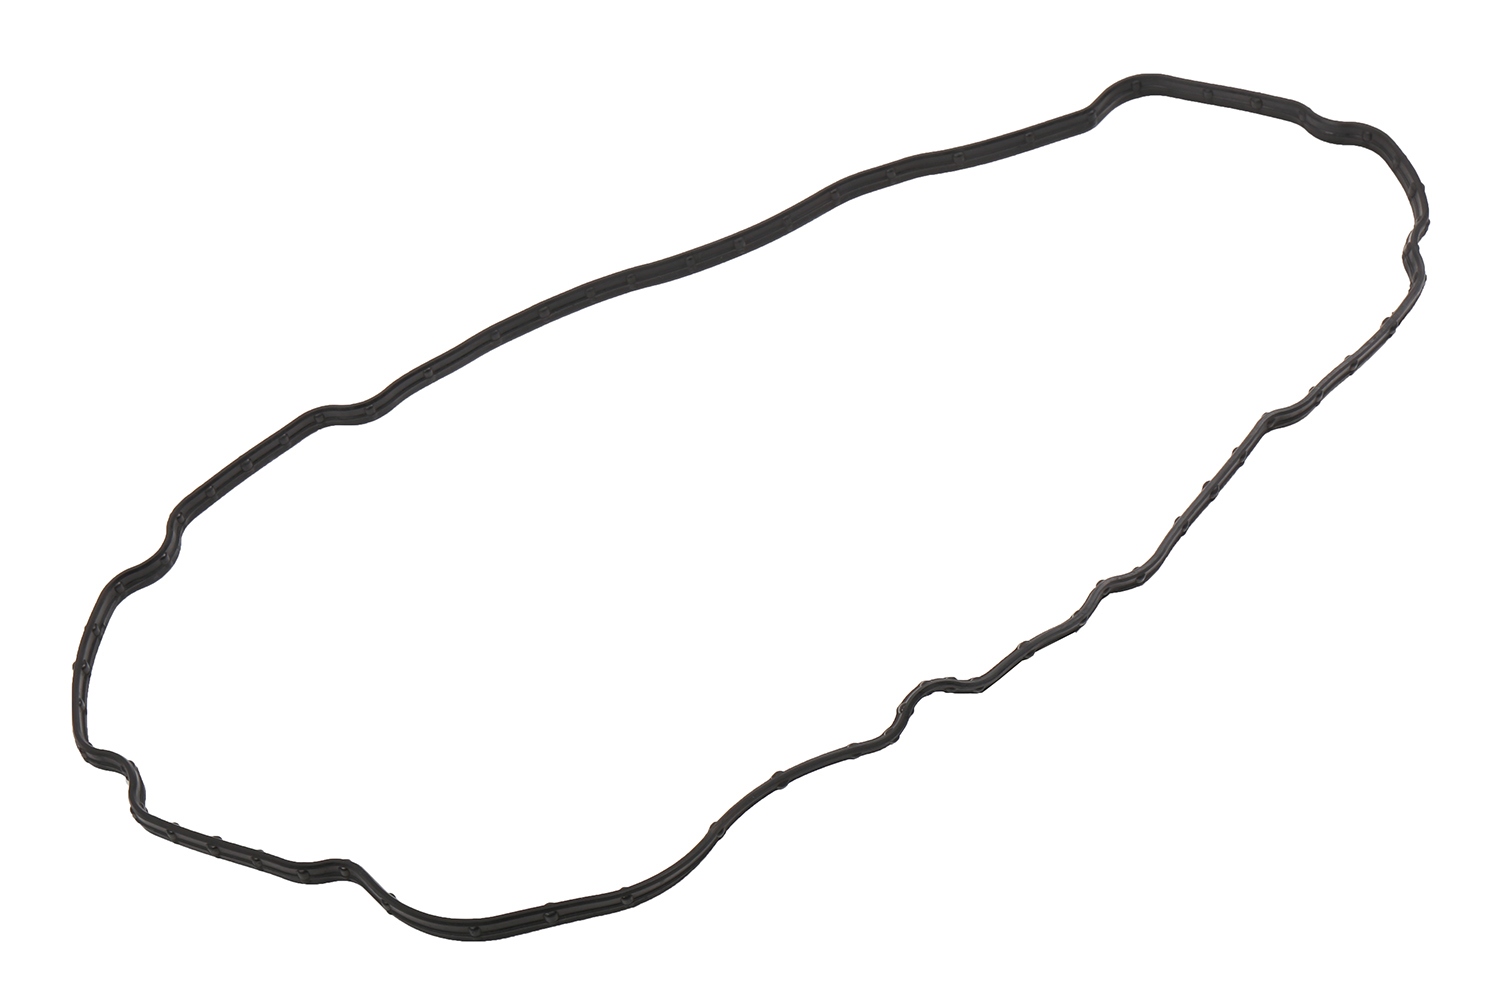 GM GENUINE PARTS - Automatic Transmission Valve Body Cover Gasket - GMP 24234281